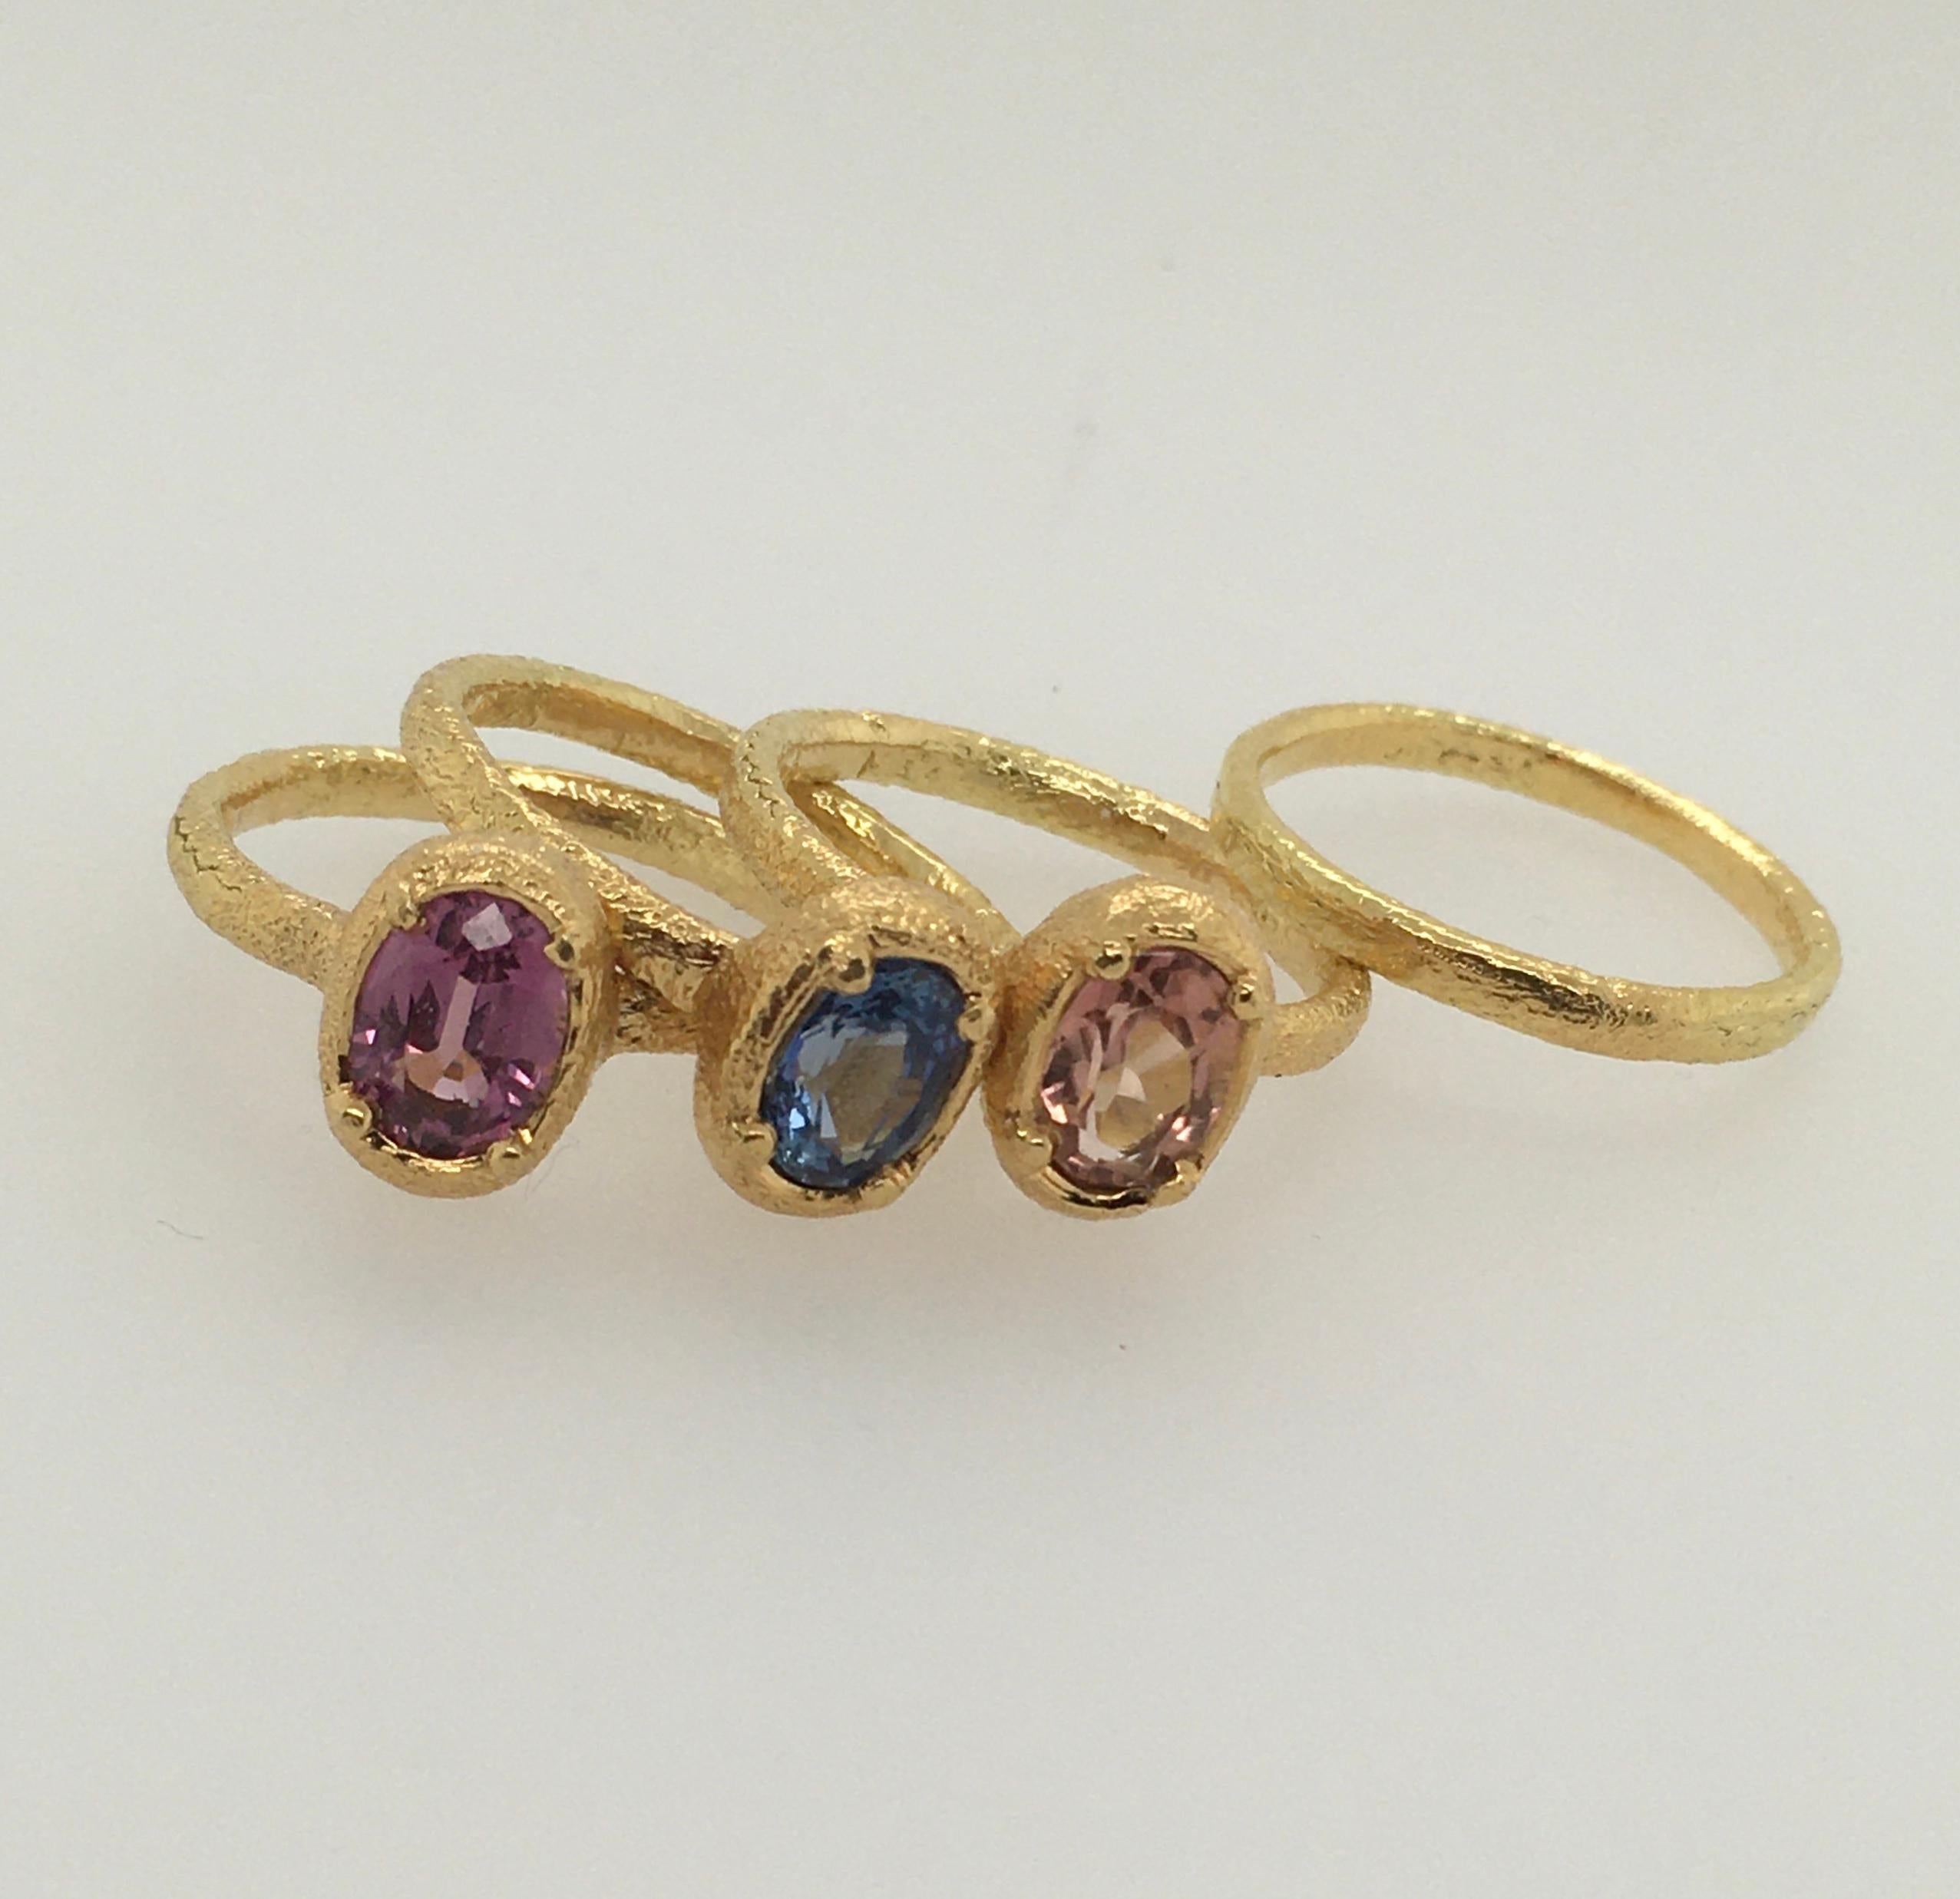 PATRICIA DAUNIS Oval Peach Tourmaline Set in Yellow Gold Stacking Ring  In Excellent Condition For Sale In Kennebunkport, ME